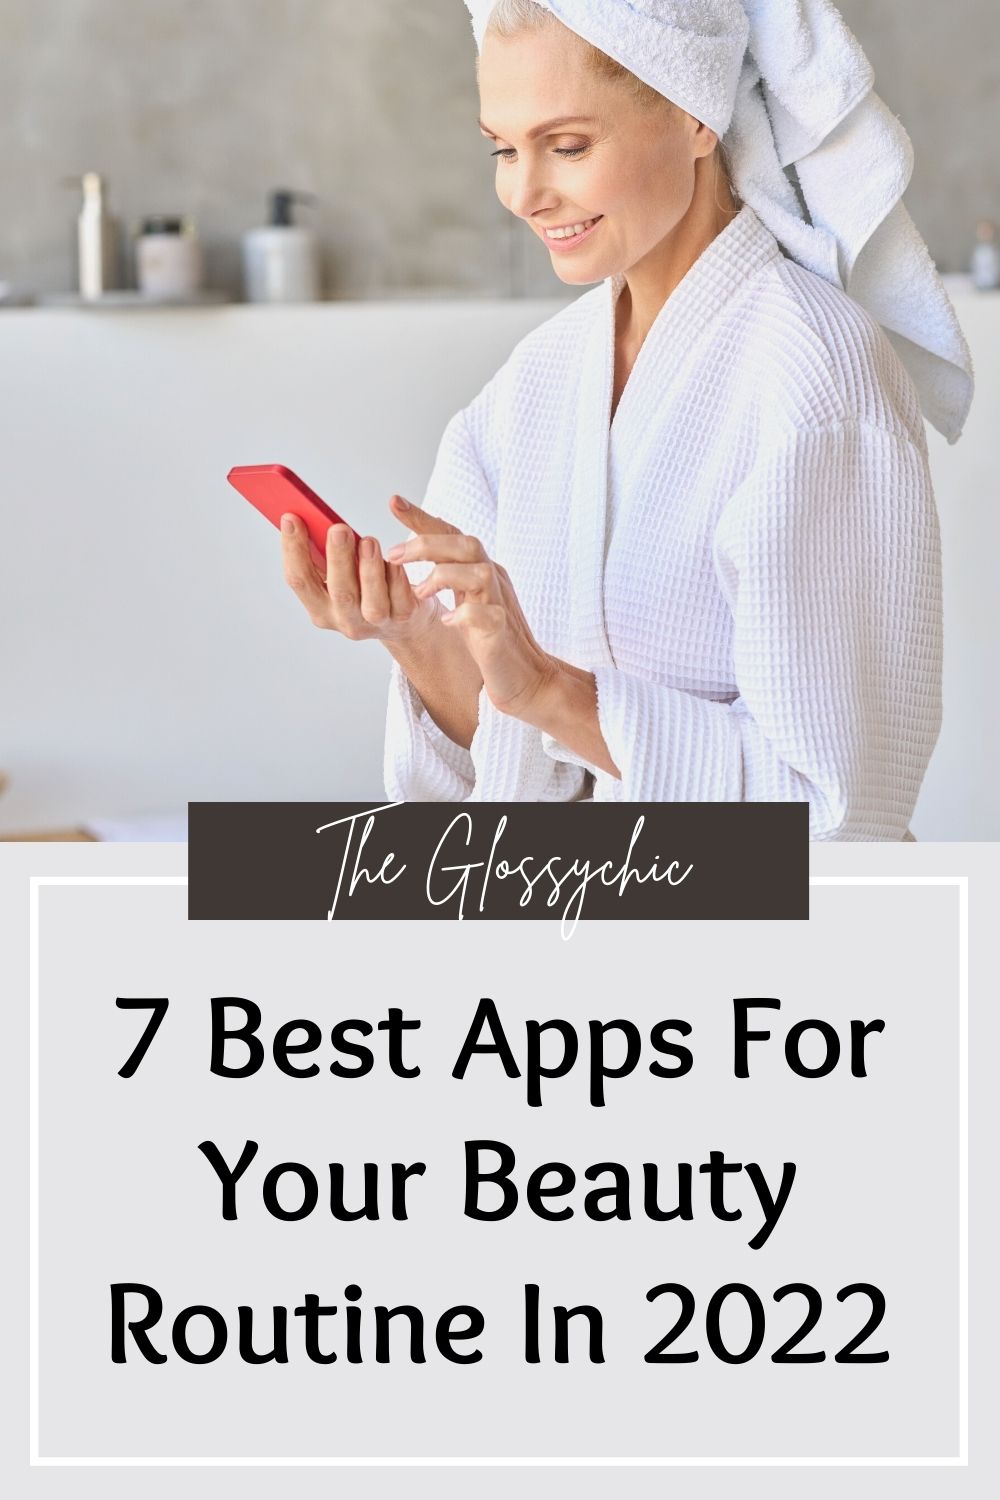 7 Best Apps For Your Beauty Routine In 2022